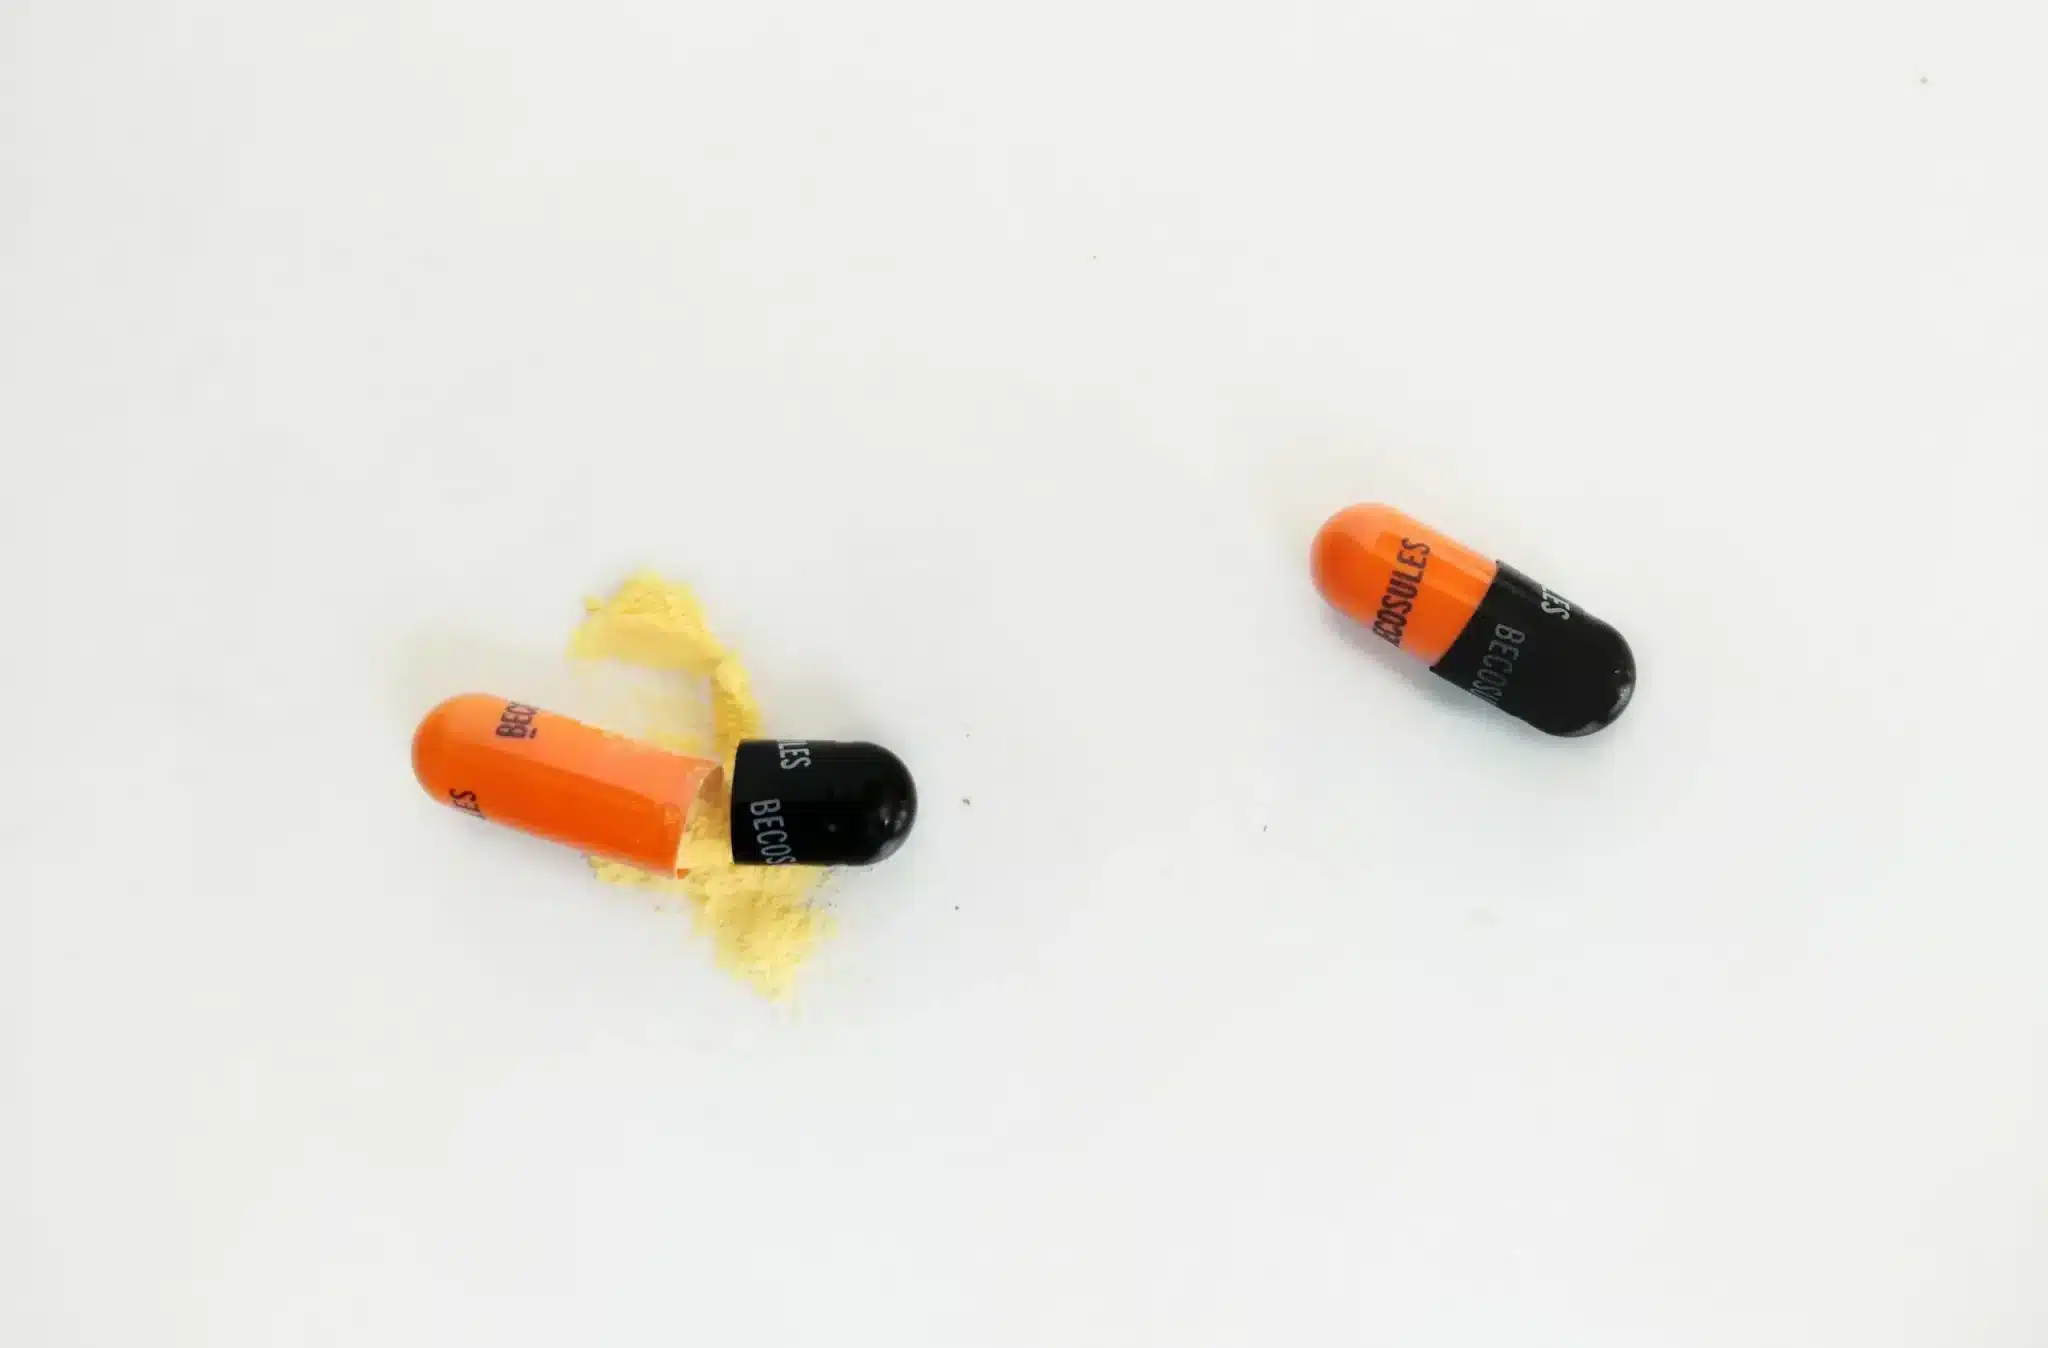 An image of two capsules on a white background, one capsule is partially opened with its orange and black contents spilled out, resembling powder. The other intact capsule has a similar color pattern. Both are marked with 'B6 300mg' signifying their dosage and potential vitamin content.